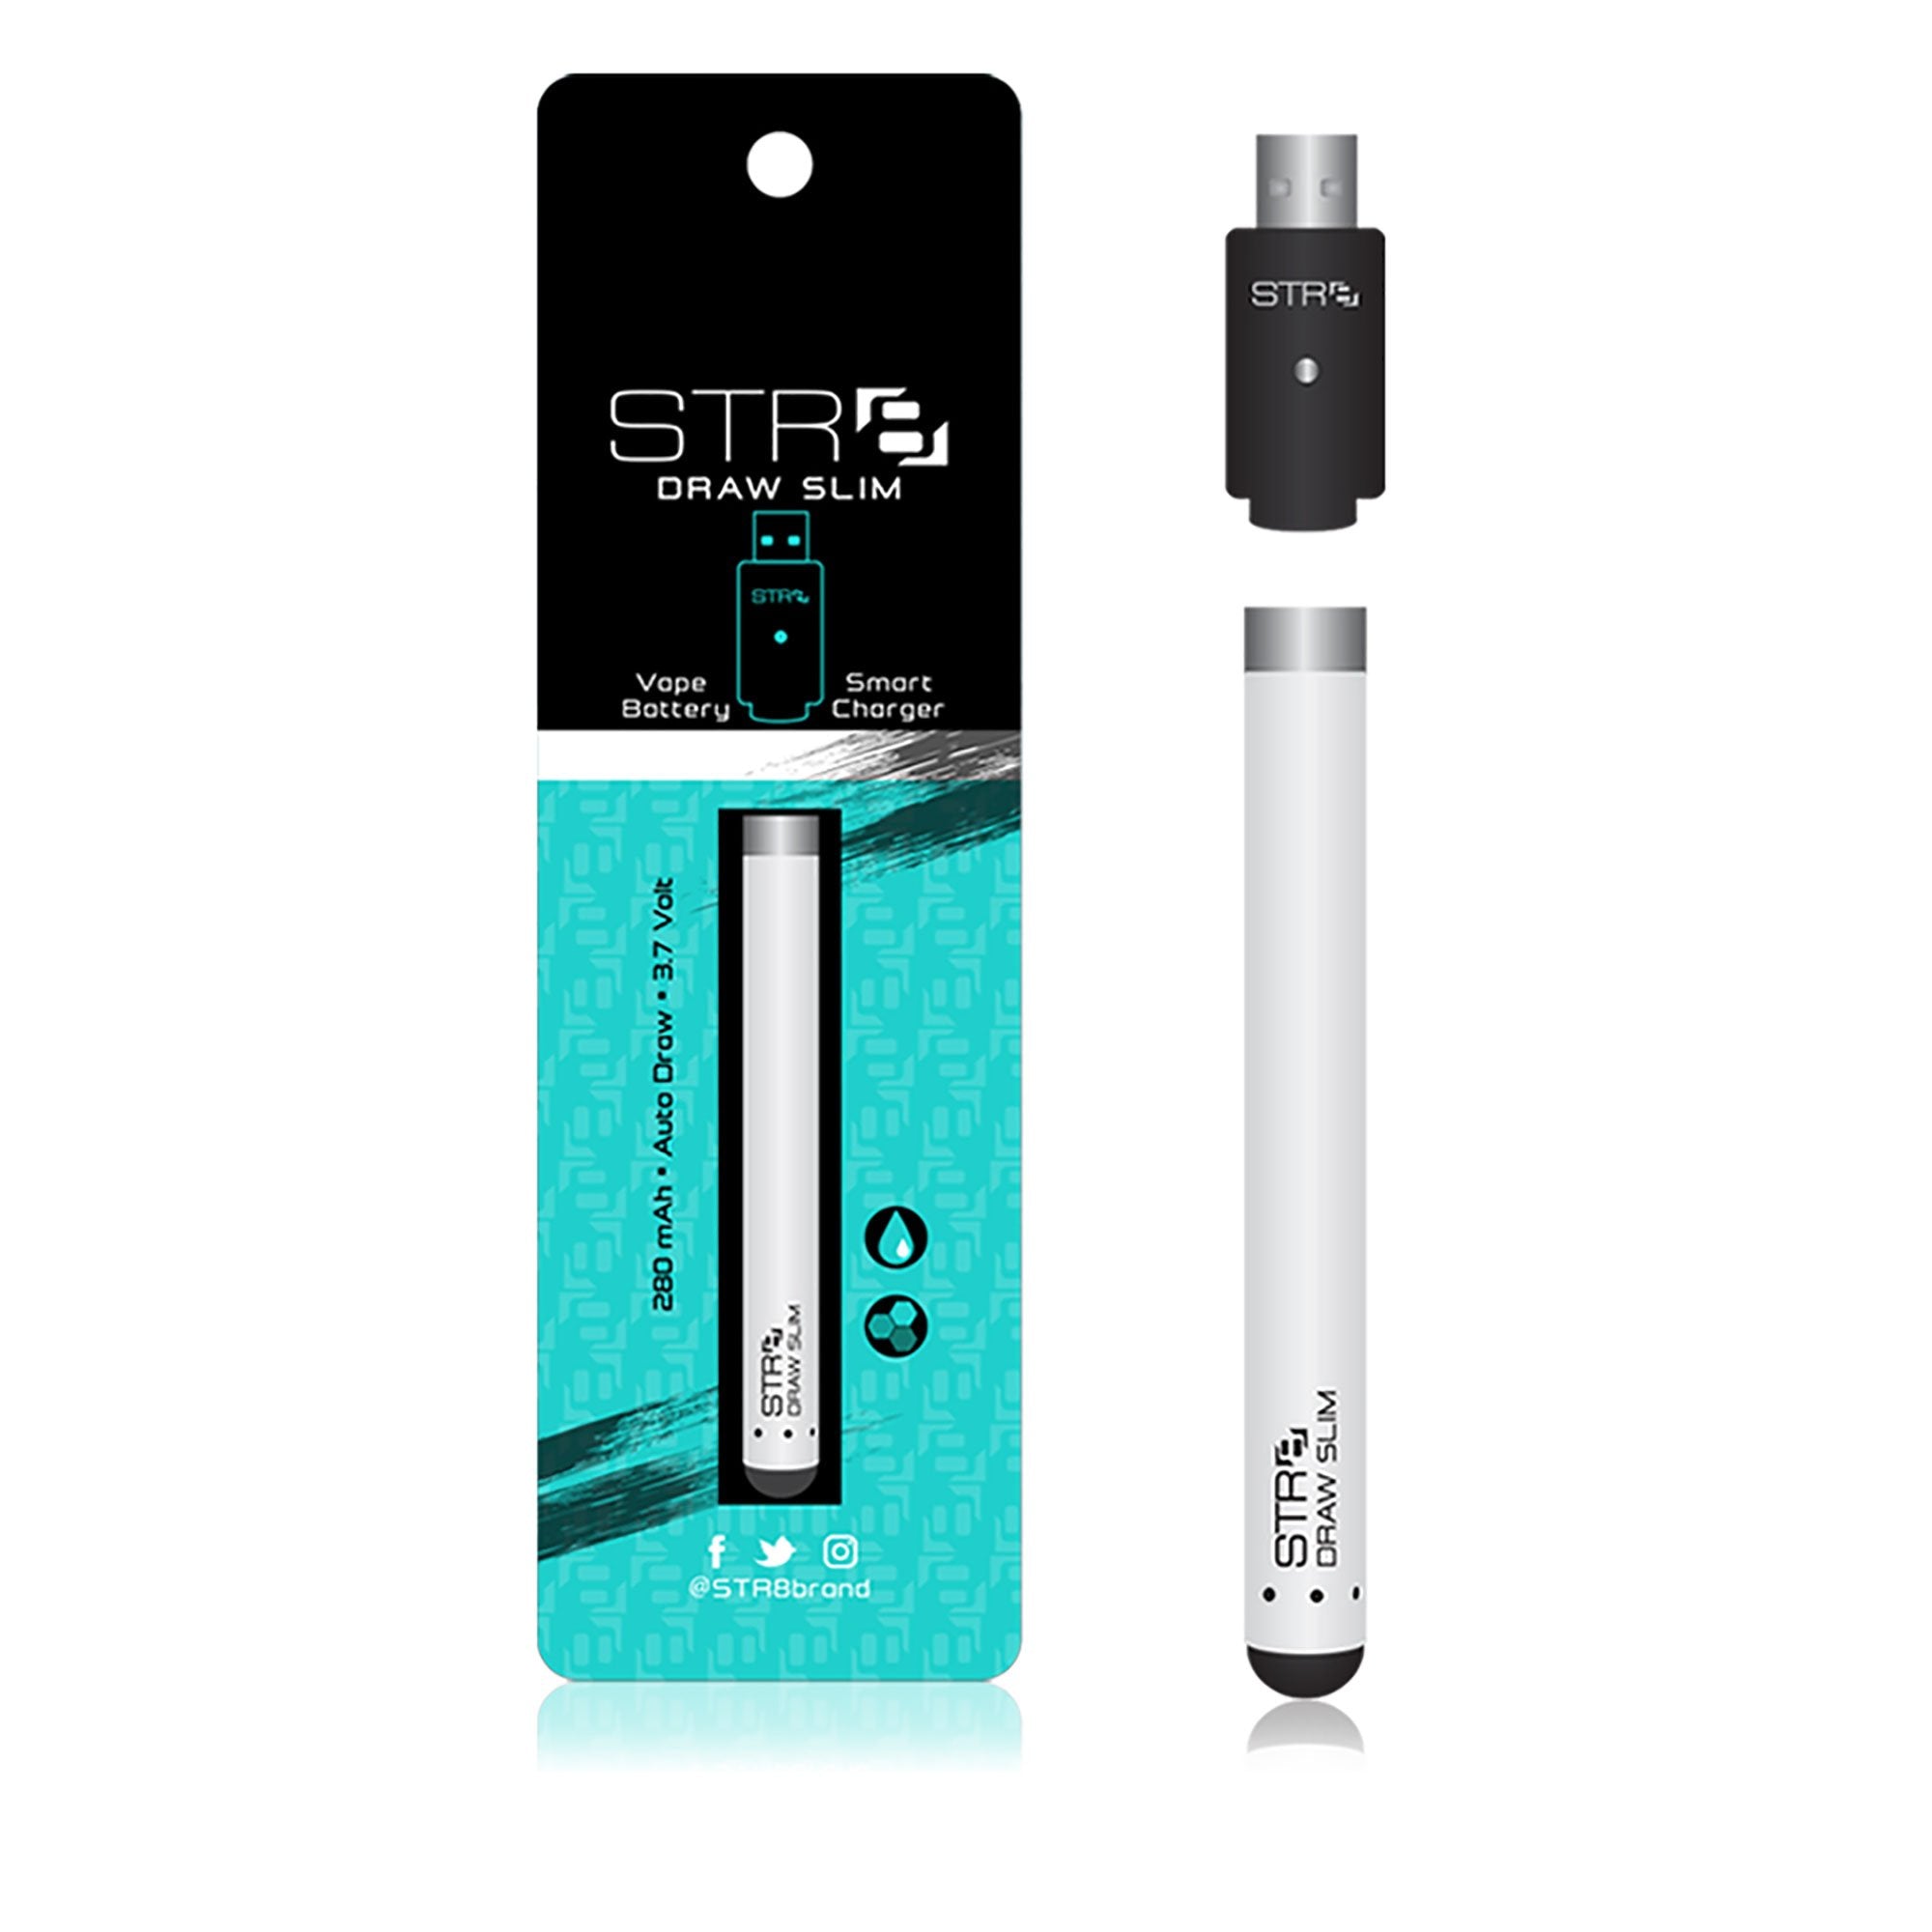 STR8 | White Slim Draw Battery w/ Charger 280MAH - 5 Count - 1